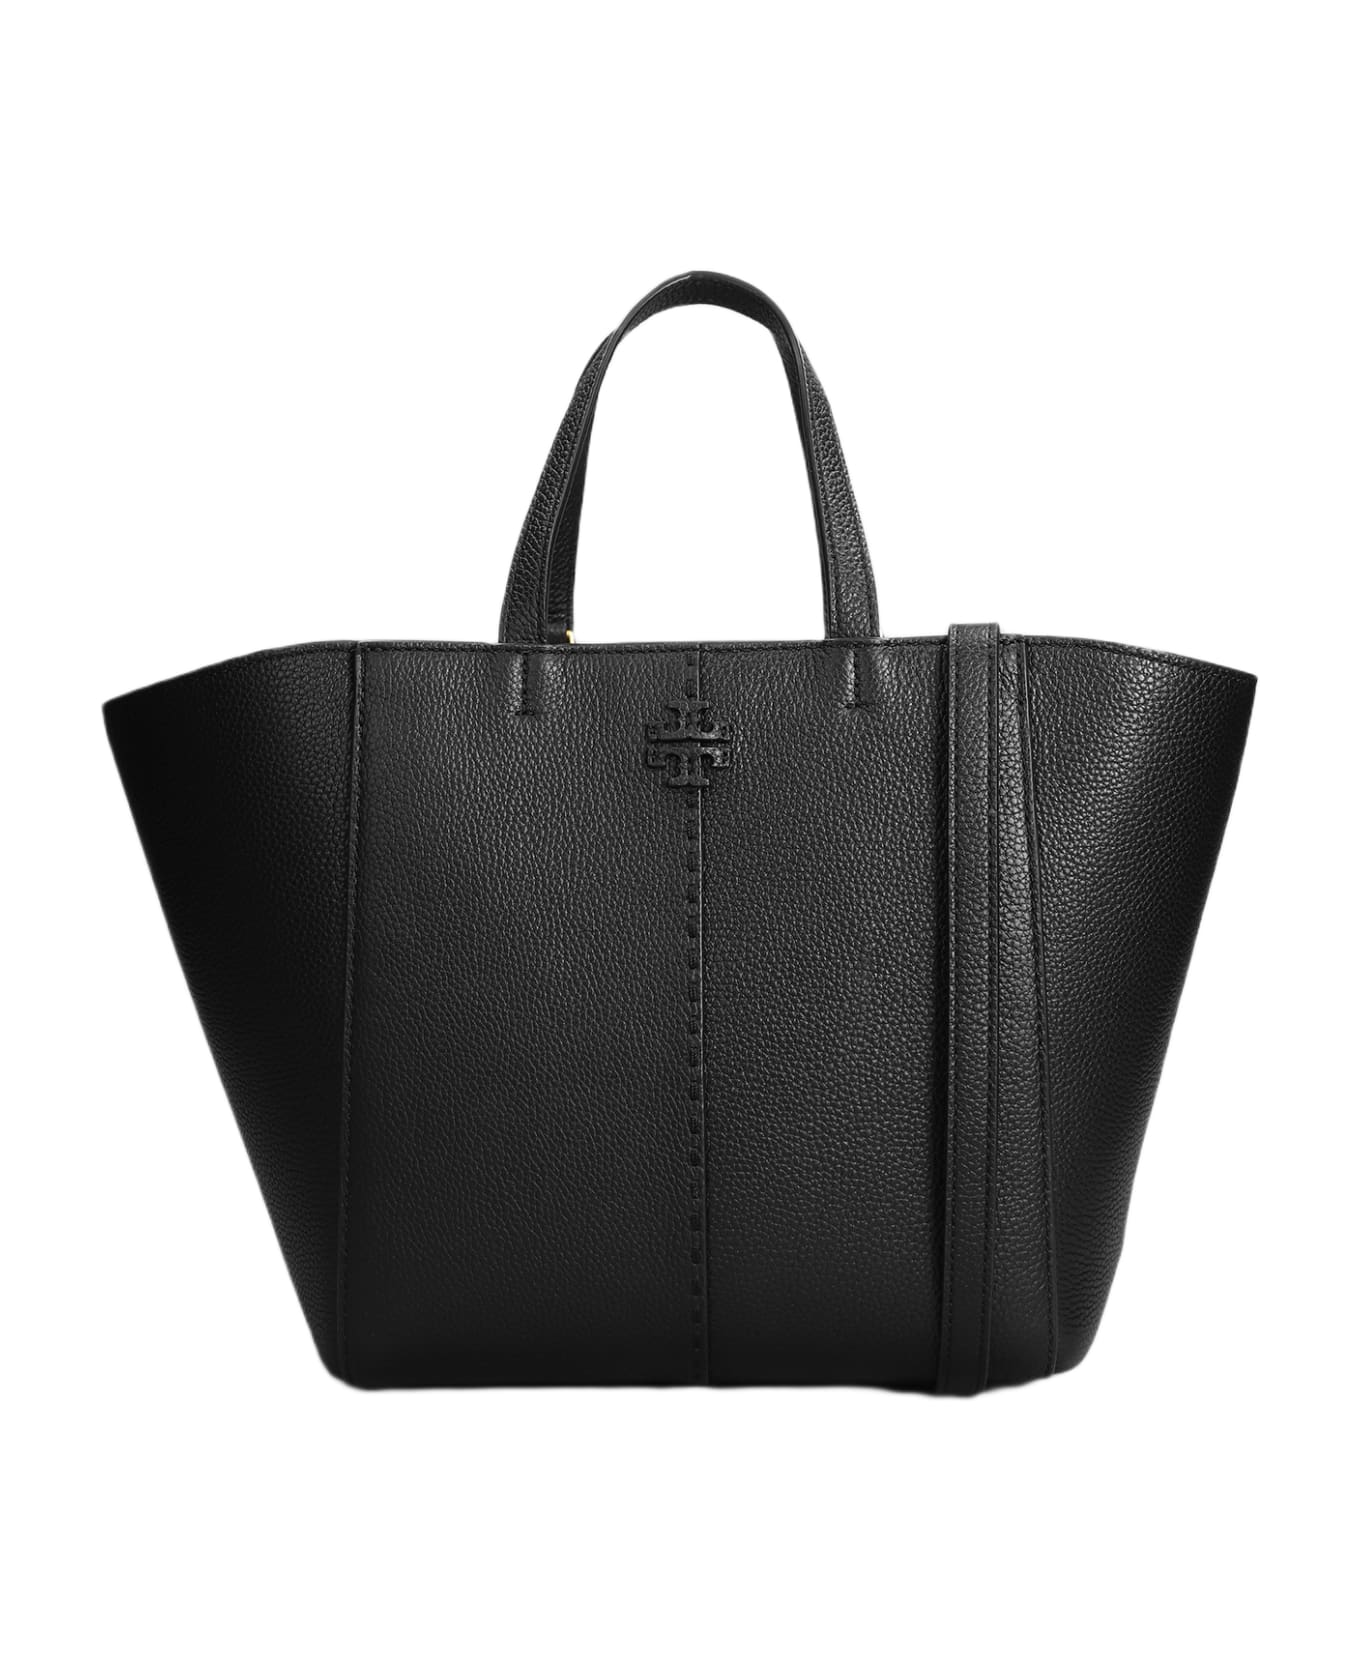 Tory Burch Mcgraw Tote In Black Leather - black